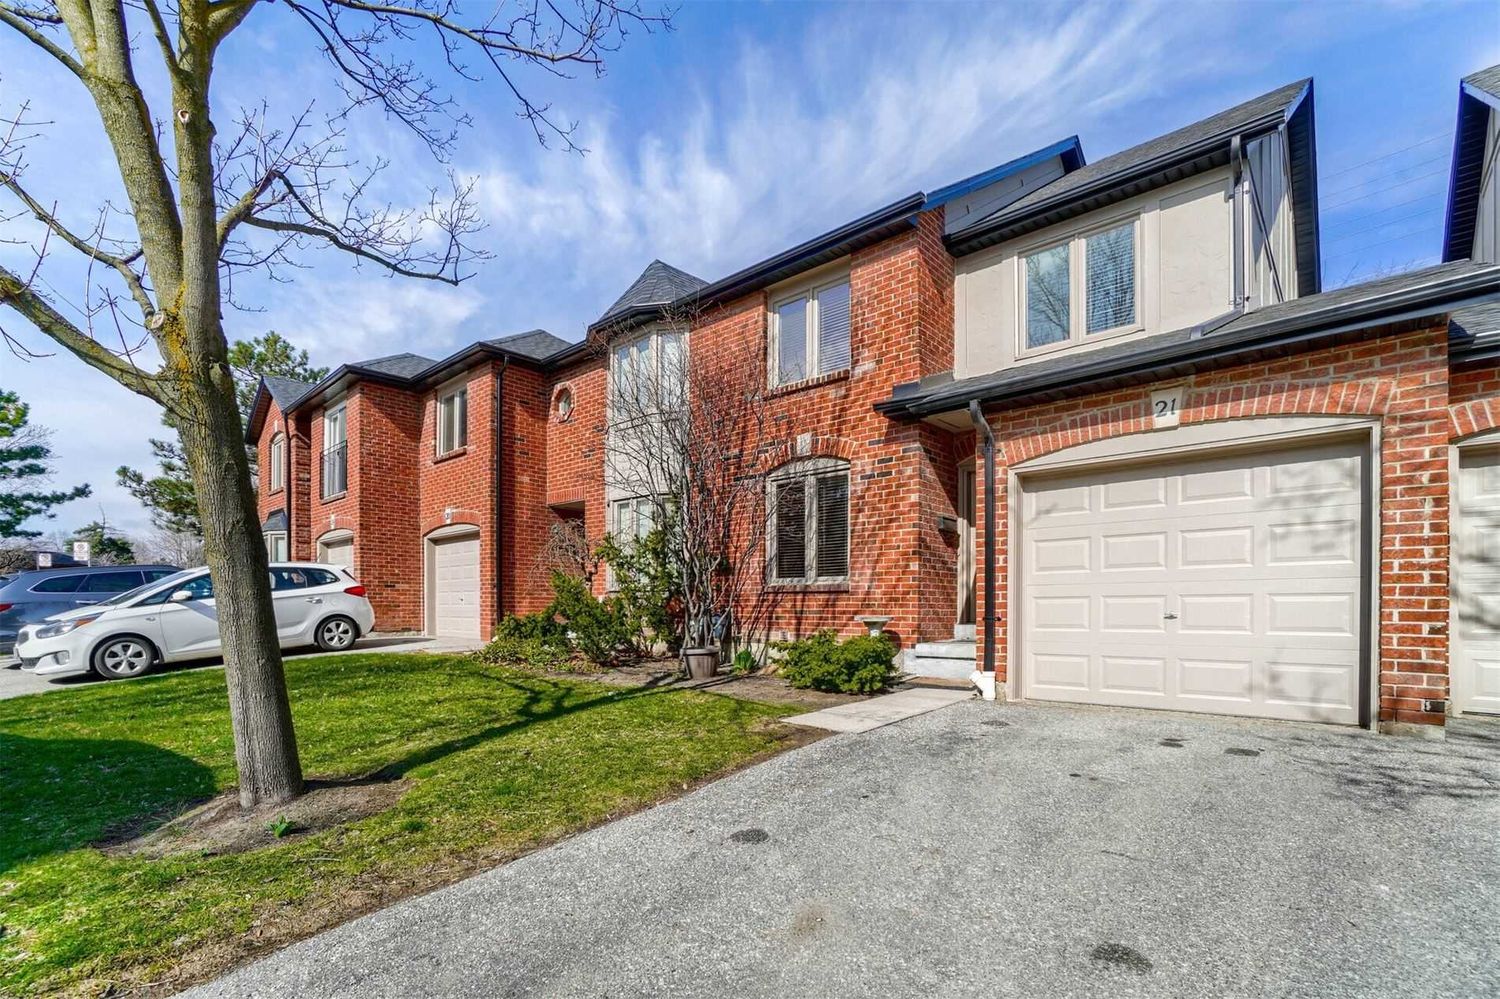 4635 Regents Terrace. 4635 Regents Terrace Townhomes is located in  Mississauga, Toronto - image #2 of 2